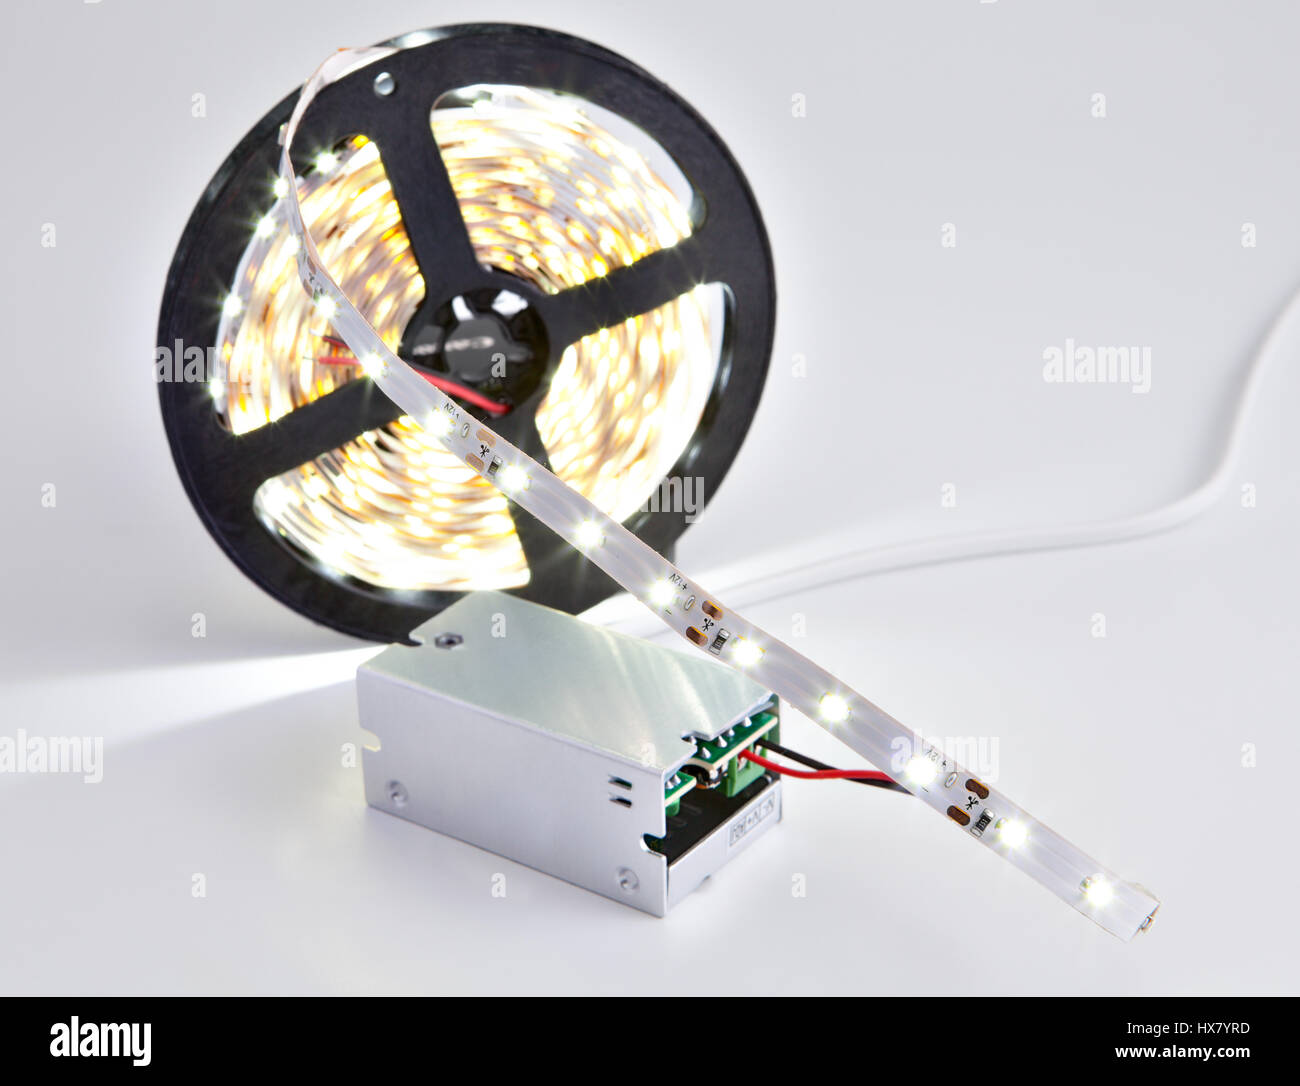 Reel of luminous LED strip light connected to voltage transformer. Stock Photo